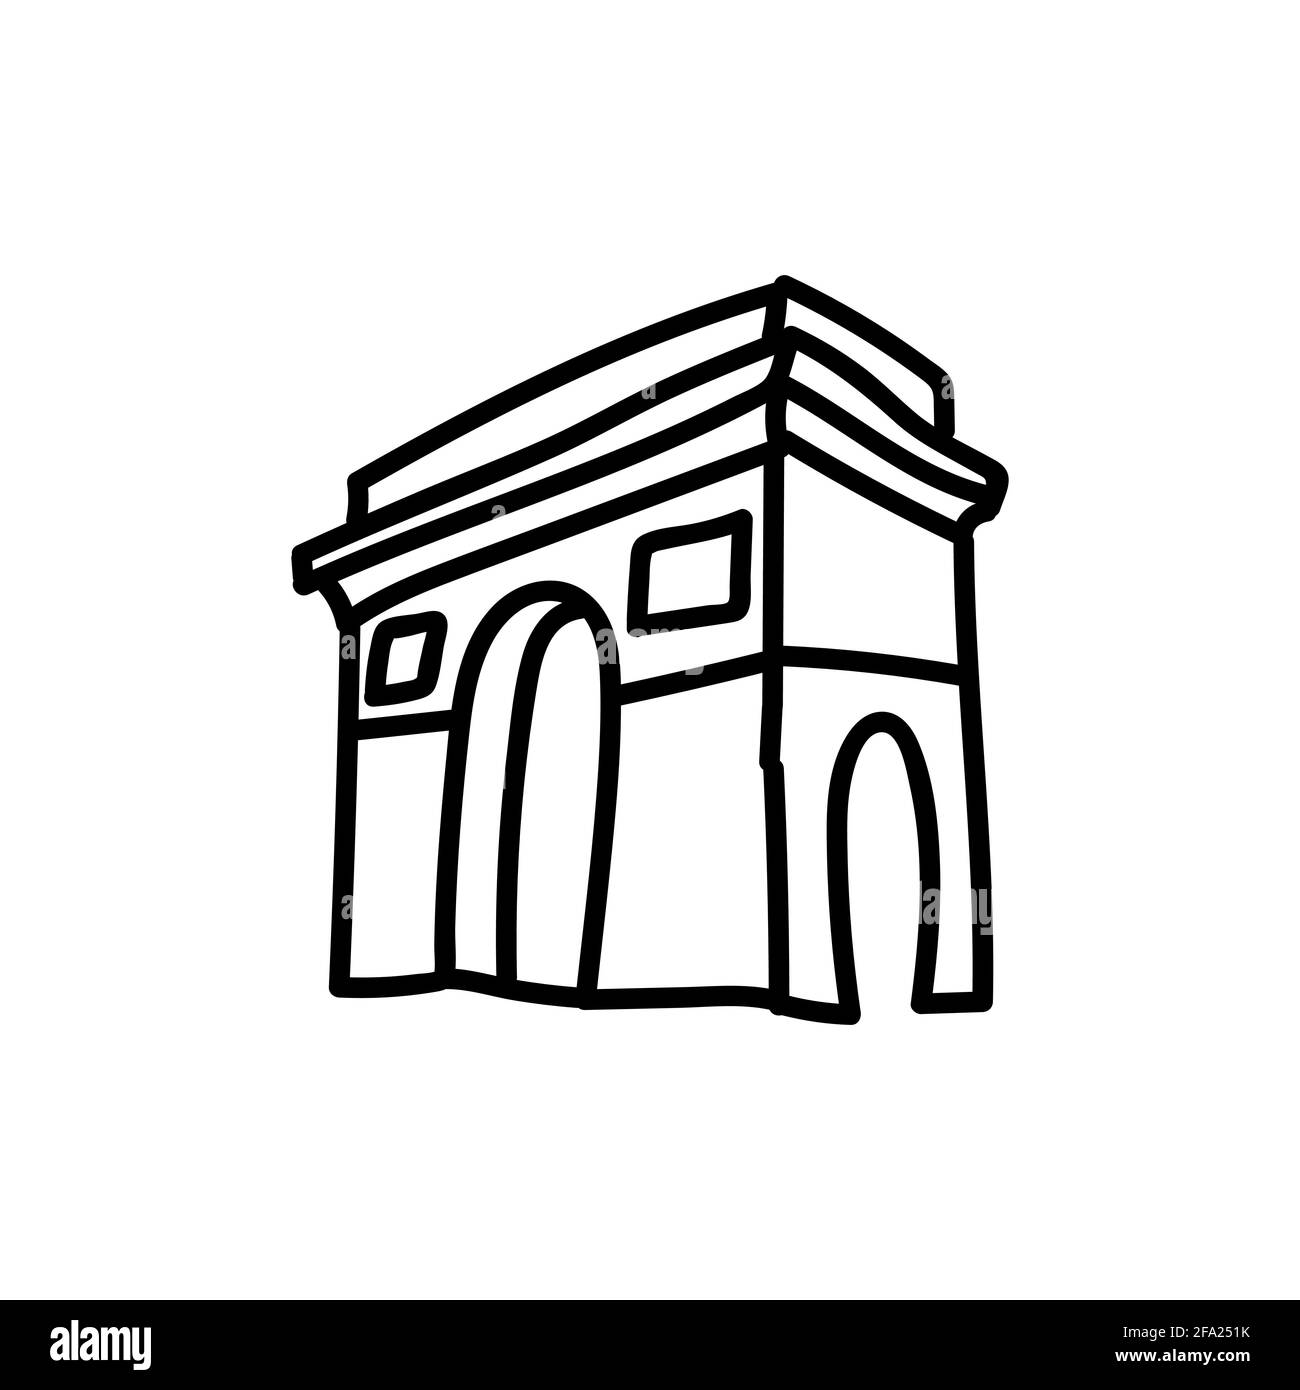 Arc de Triomphe. Hand drawn doodle vector illustration isolated on whithe background. Simple drawings with black color. Stock Vector